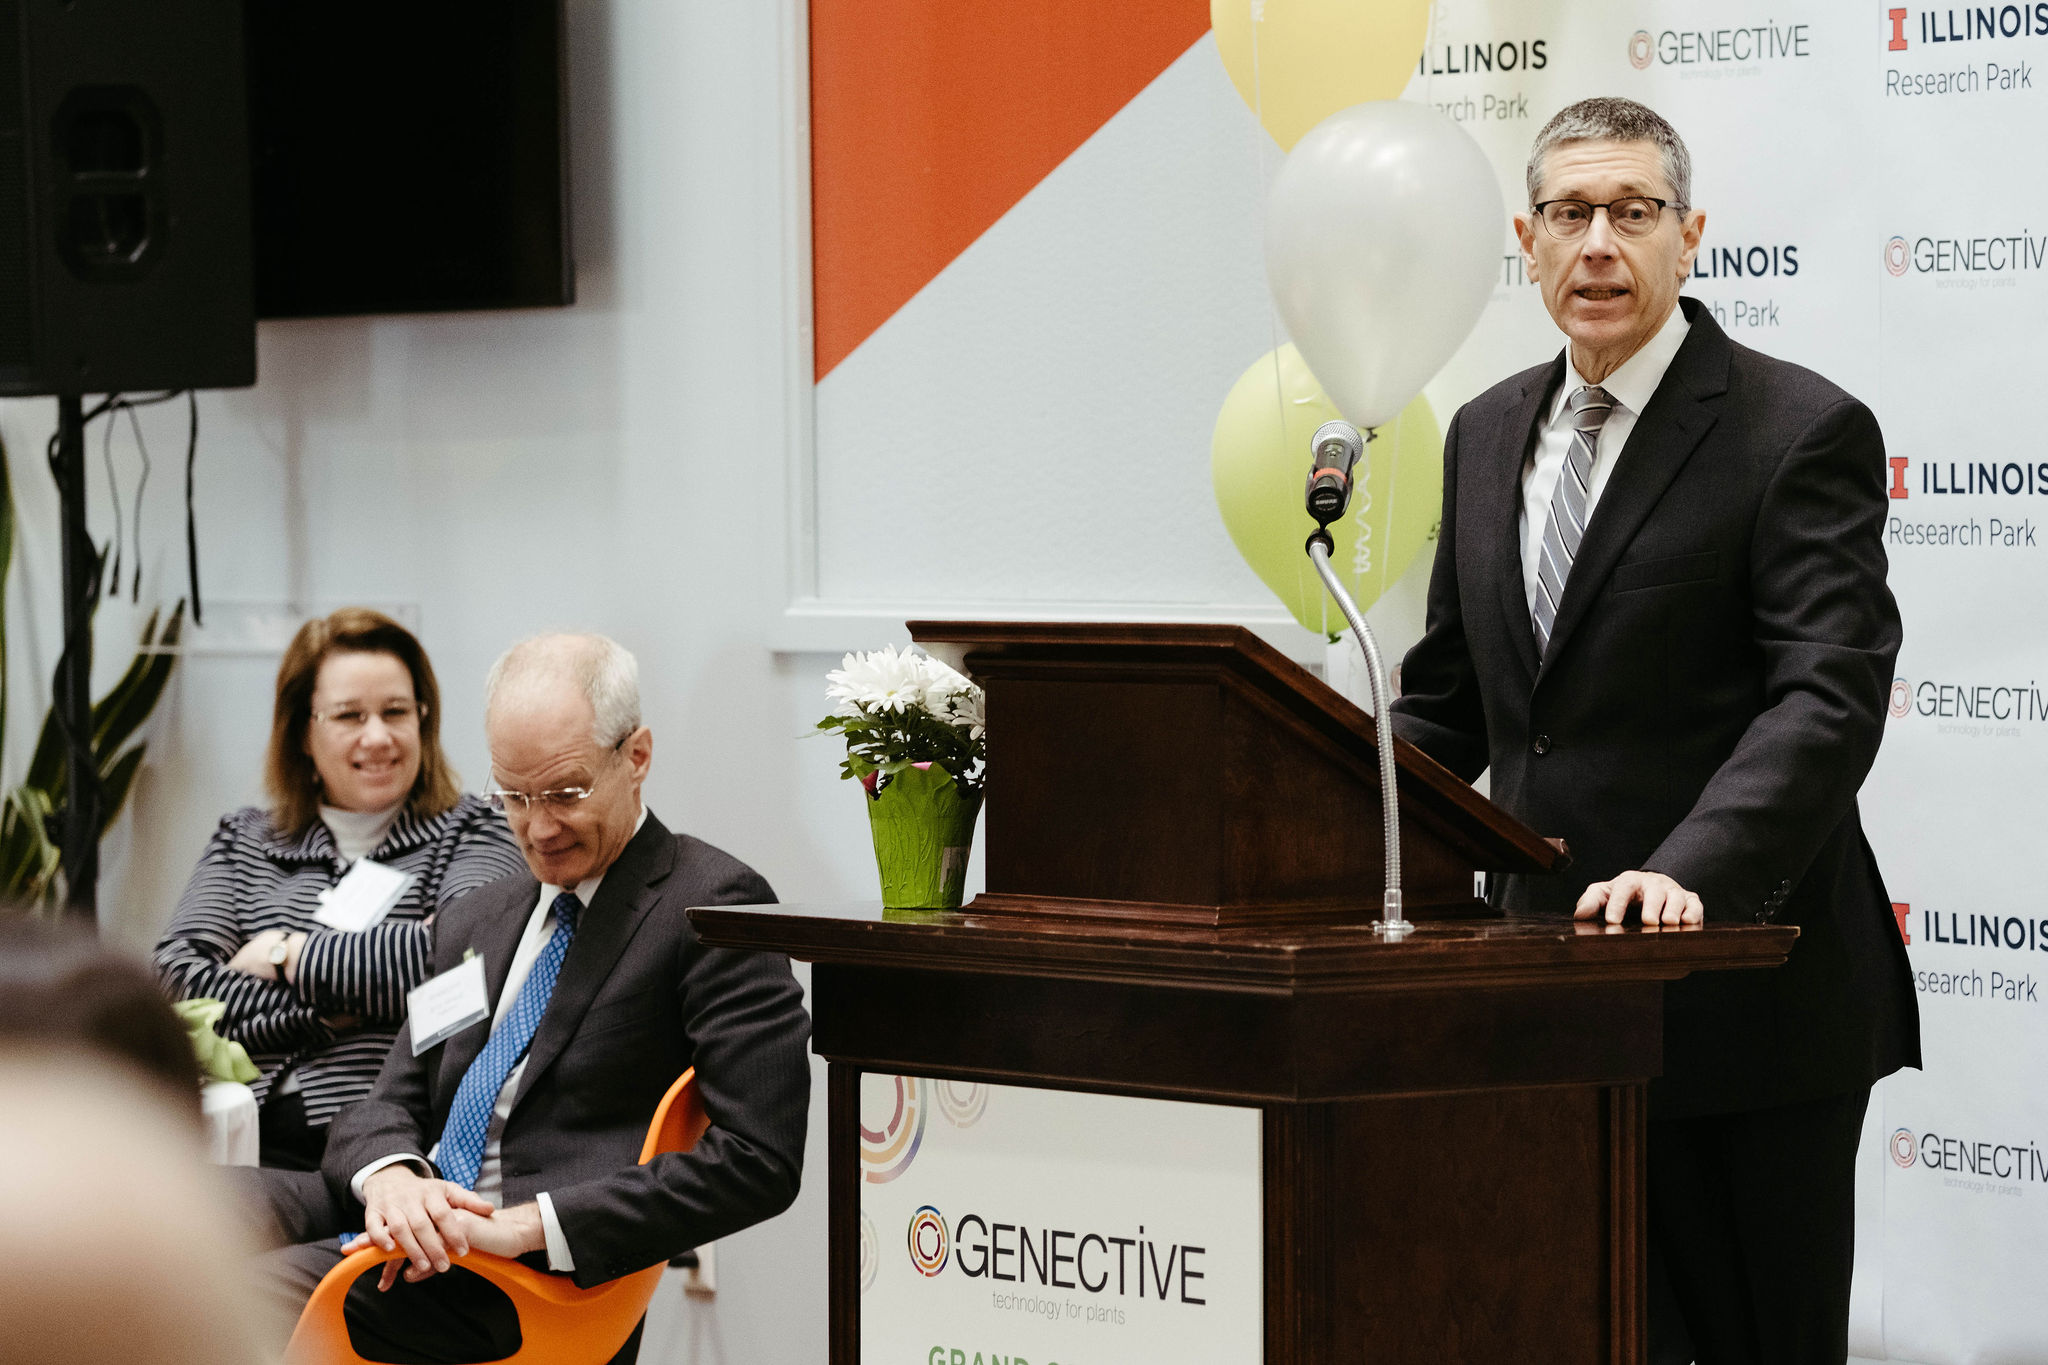 Talks at the Genective Grand Opening